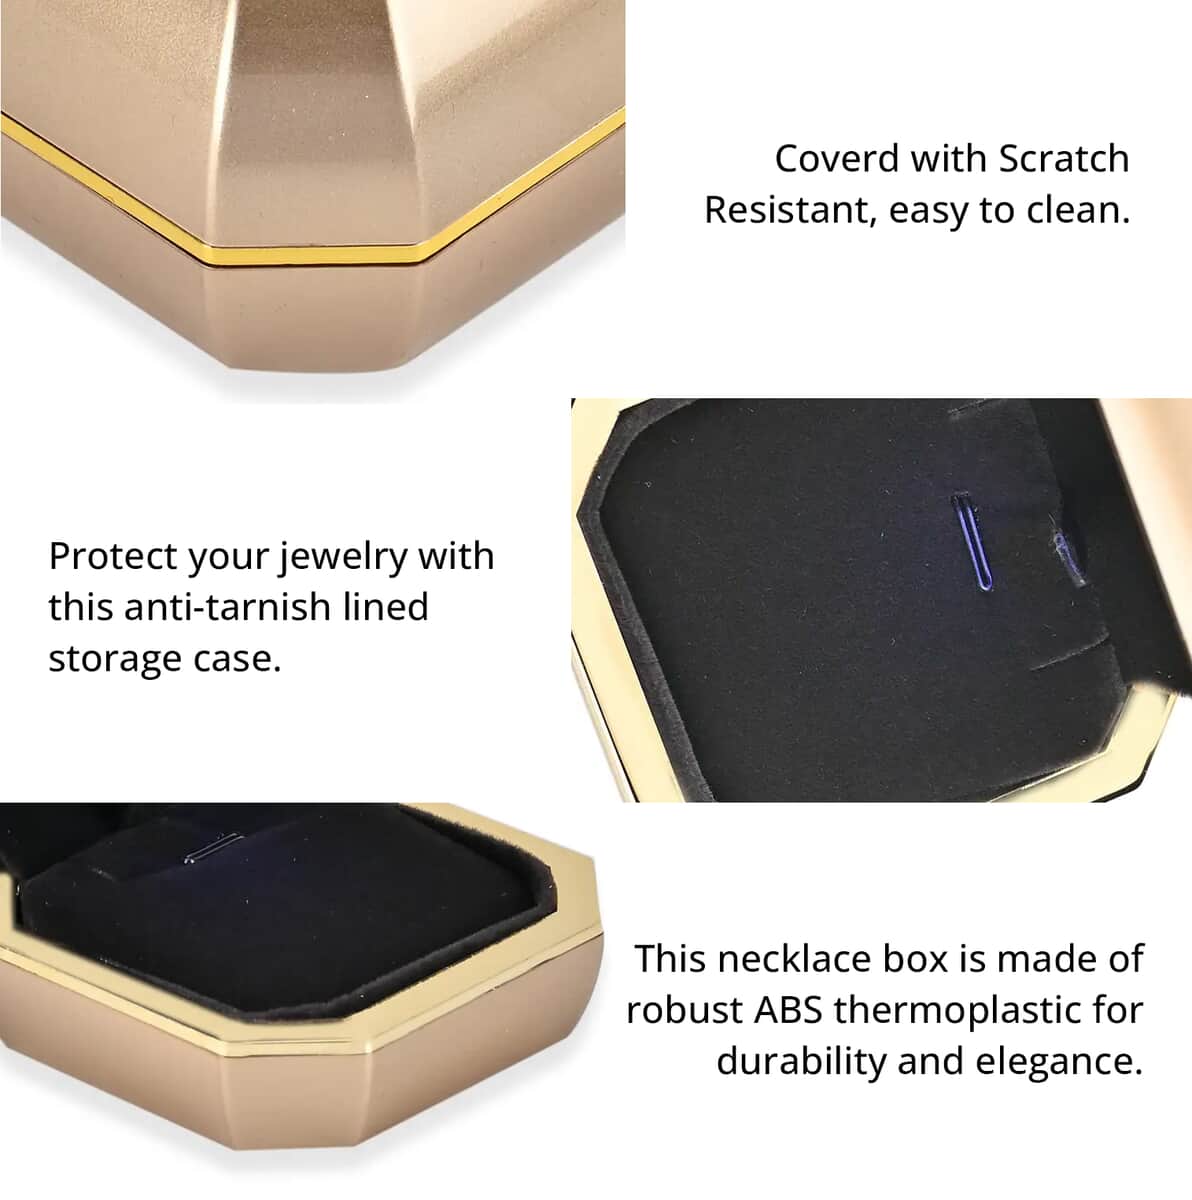 Golden Solid Luxurious Polished Ring Jewelry Box with Led Light, Anti Tarnish Jewelry Box, Jewelry Storage Case, Ring Storage Box (2.8x2.8x2.4) image number 3